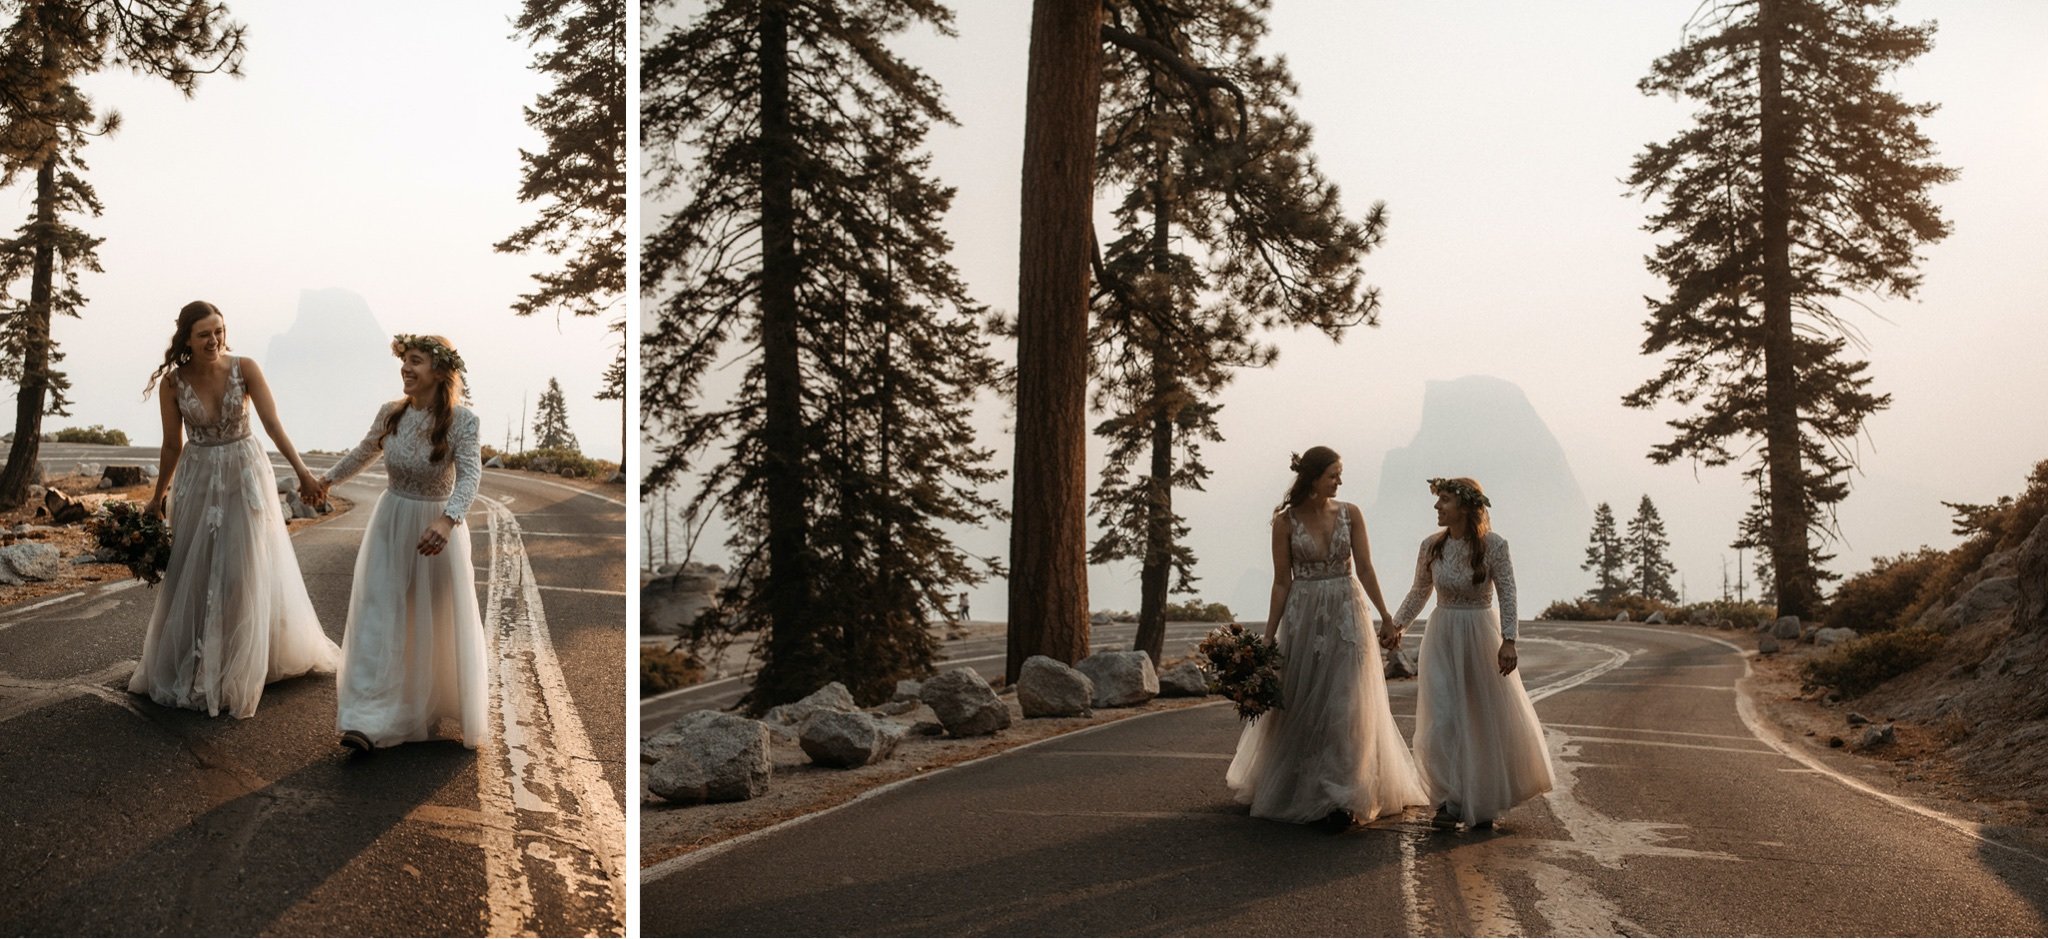 Yosemite National Park Elopement with Two Brides-Will Khoury91.jpg